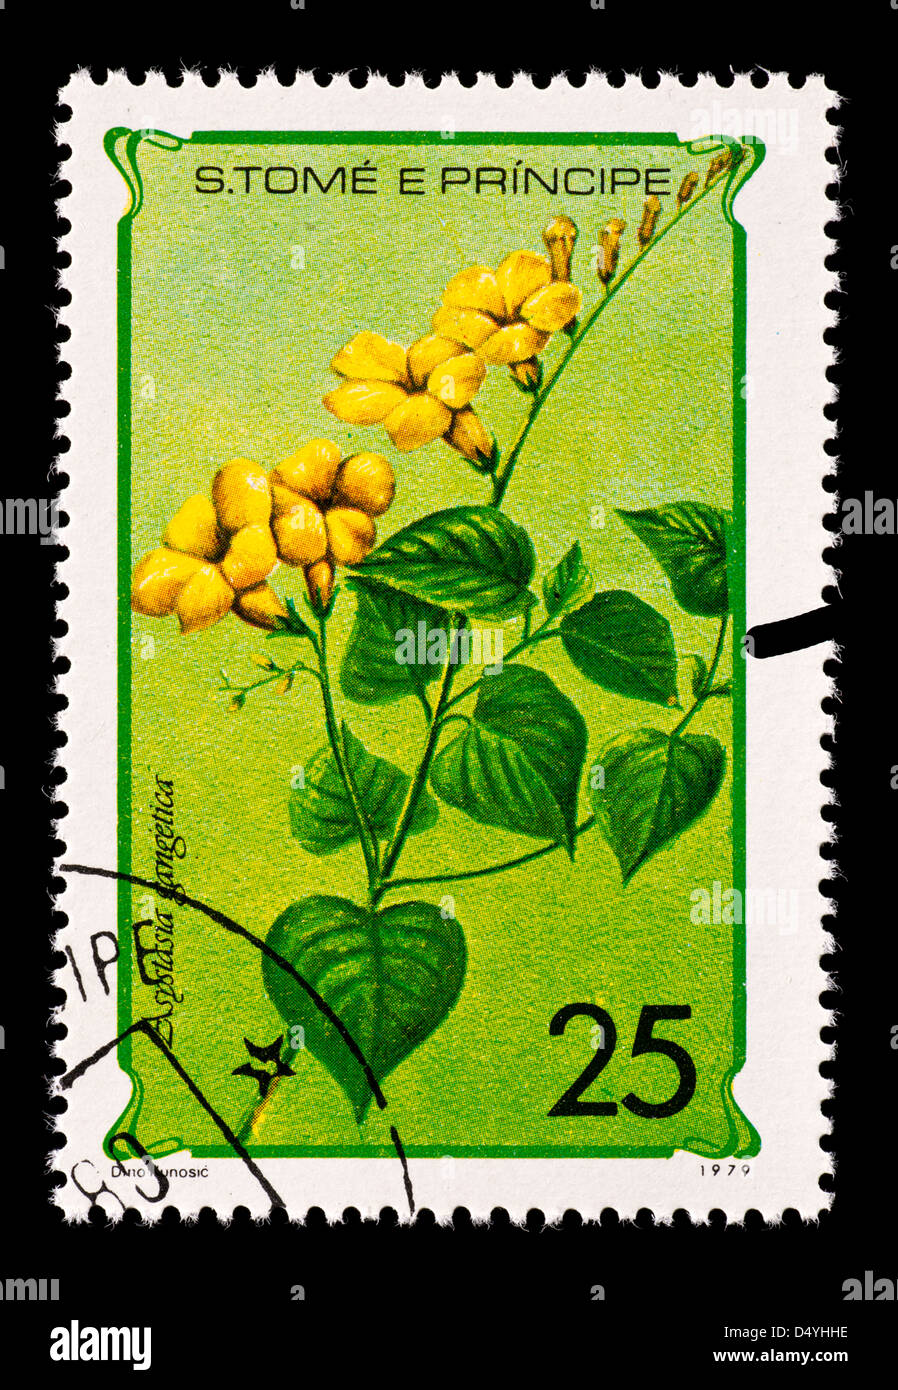 Postage stamp from Saint Thomas and Prince Islands depicting Chinese Violet wildflowers (Asystasia gangetica) Stock Photo